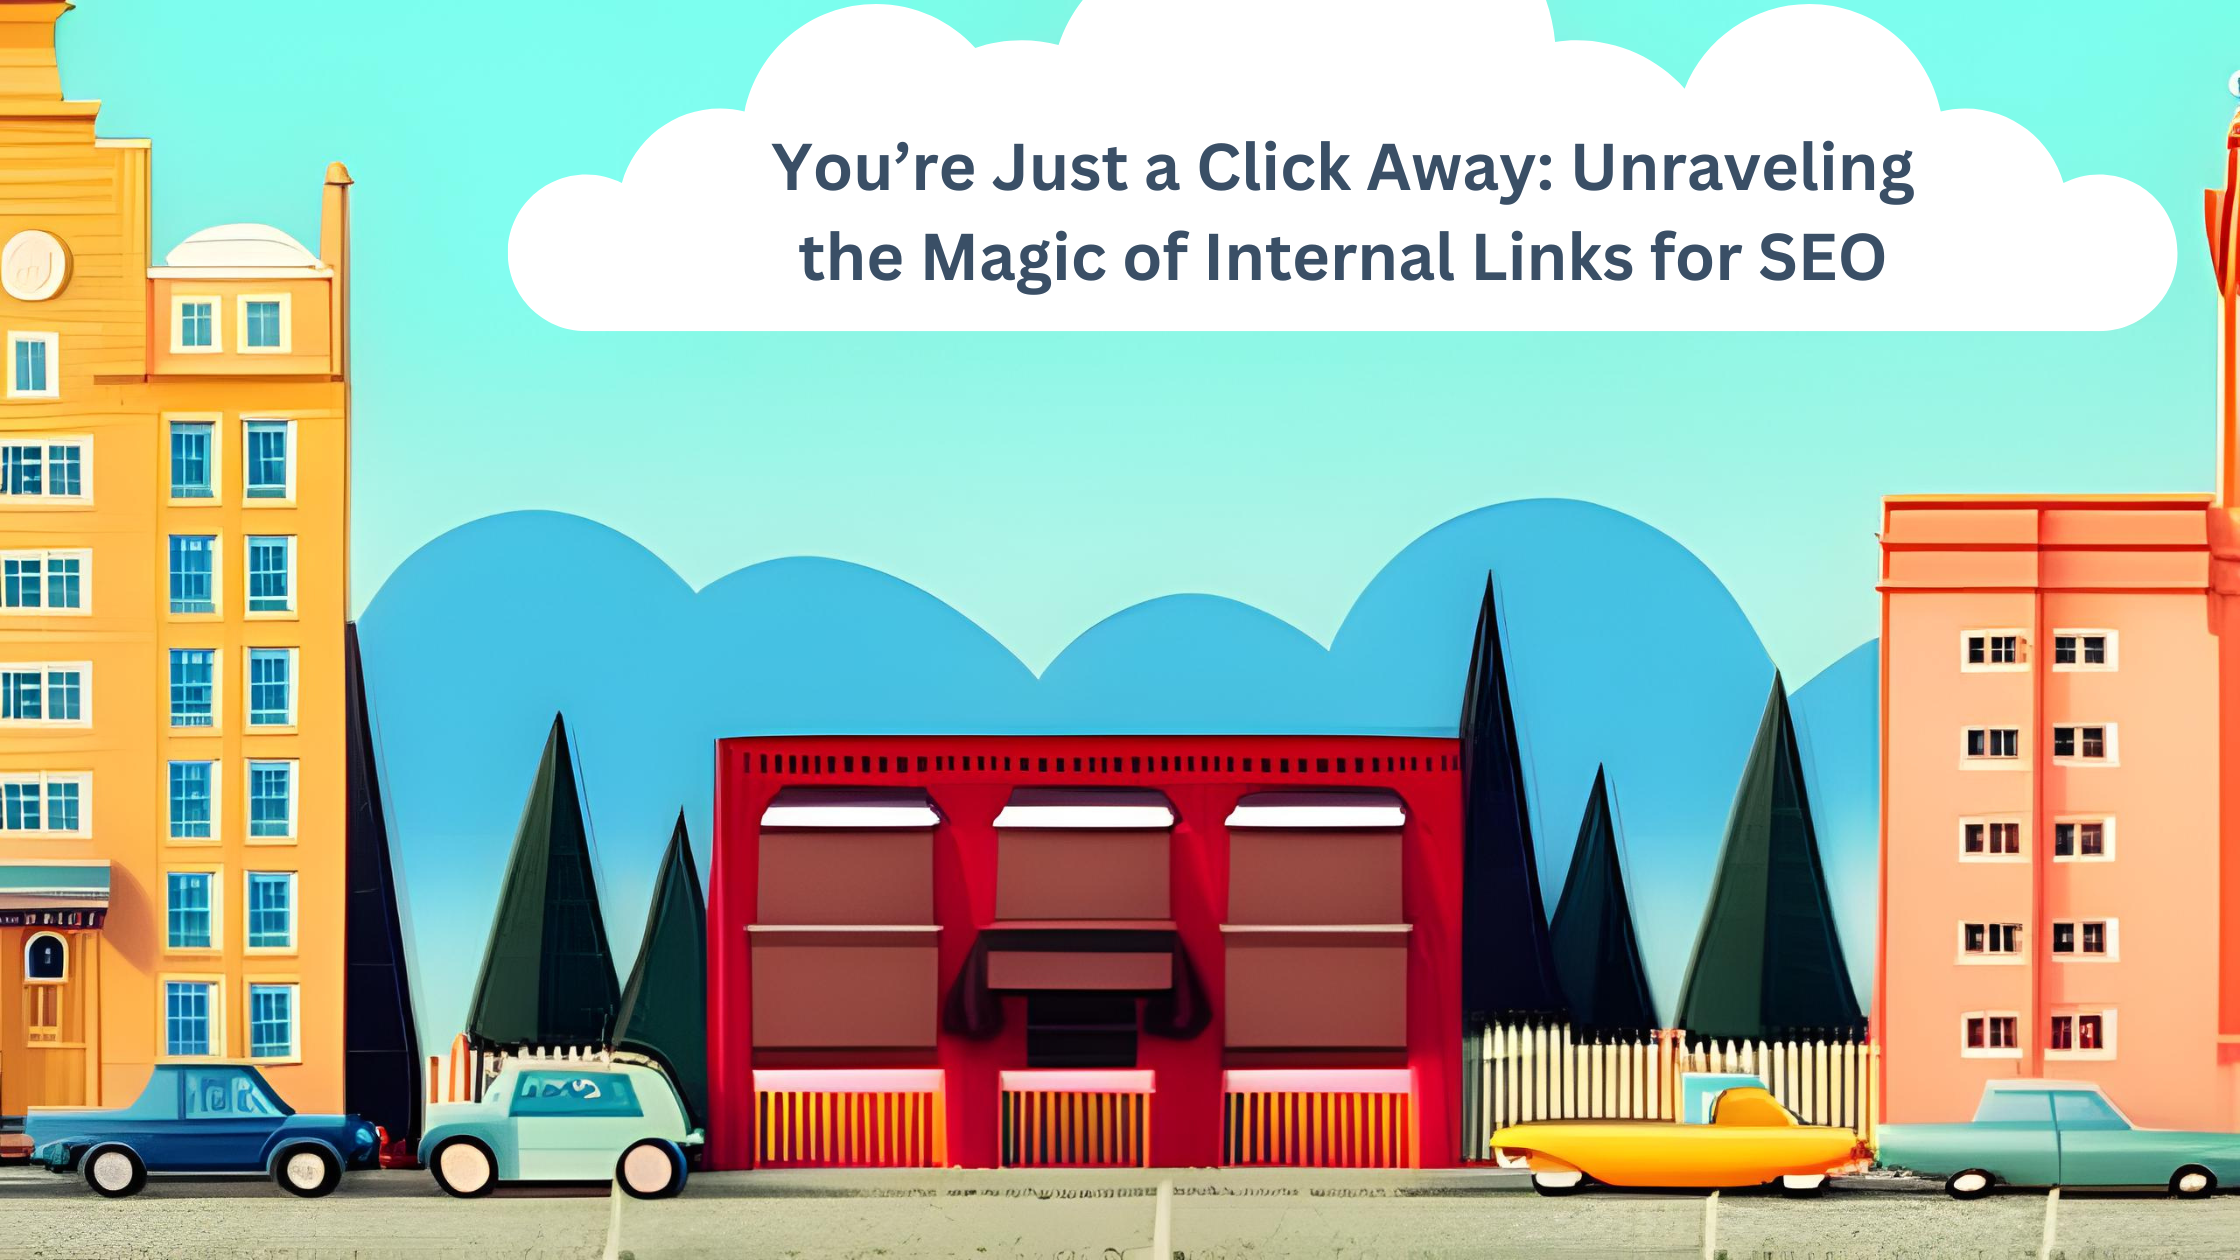 You’re Just a Click Away: Unraveling the Magic of Internal Links for SEO